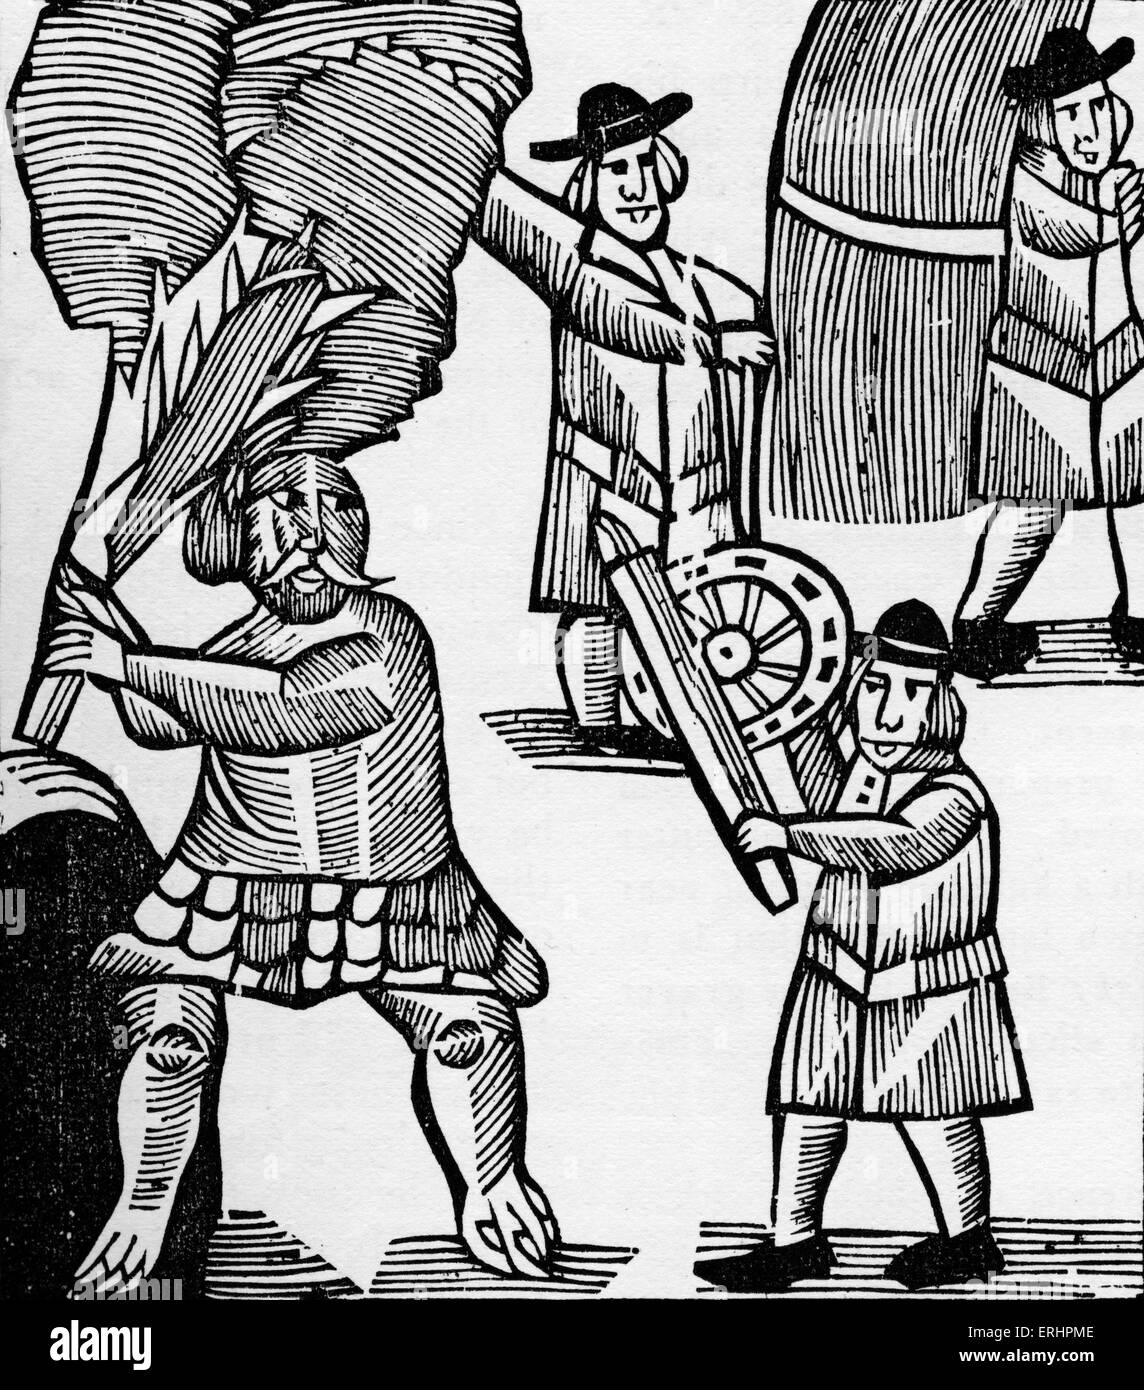 History of Thomas Hickathrift - a legendary giant killer of East Anglian English folklore. The giant (left) picks up his club to beat Tom, but Tom (right) takes the cartwheel, preparing to fight the giant. The fairy tale as told by Joseph Jacobs originates from a chapbook in the Pepsyian Library from around 1660. Stock Photo